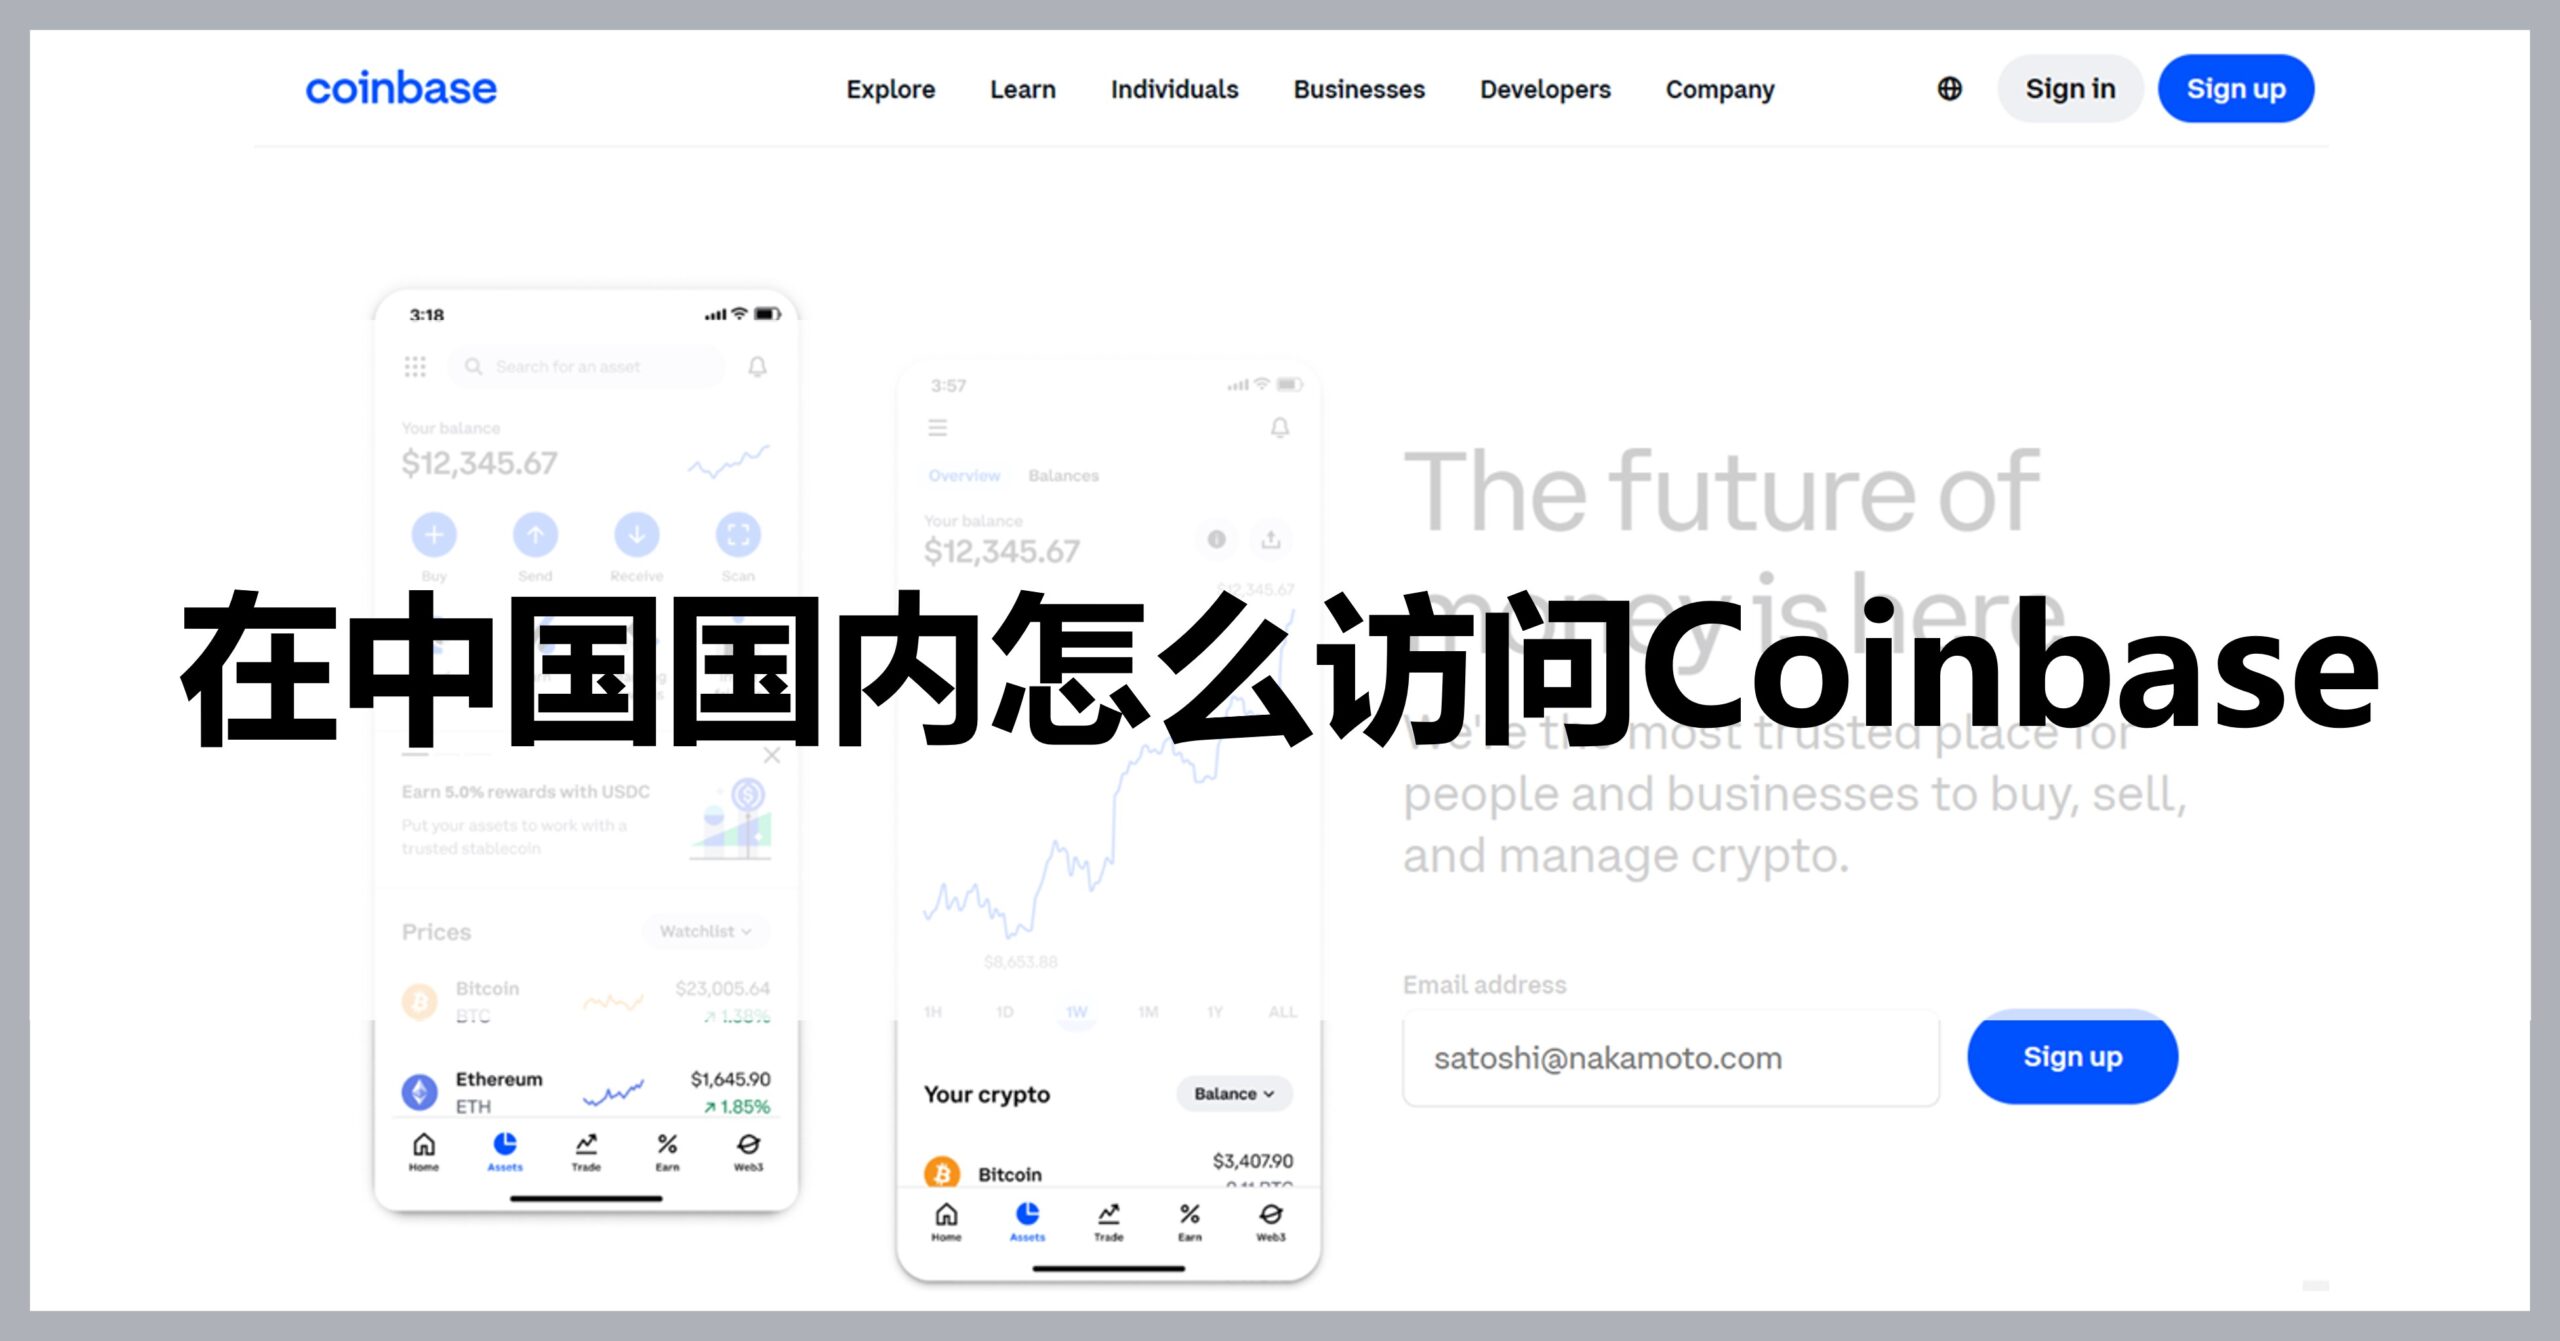 How to access Coinbase in China